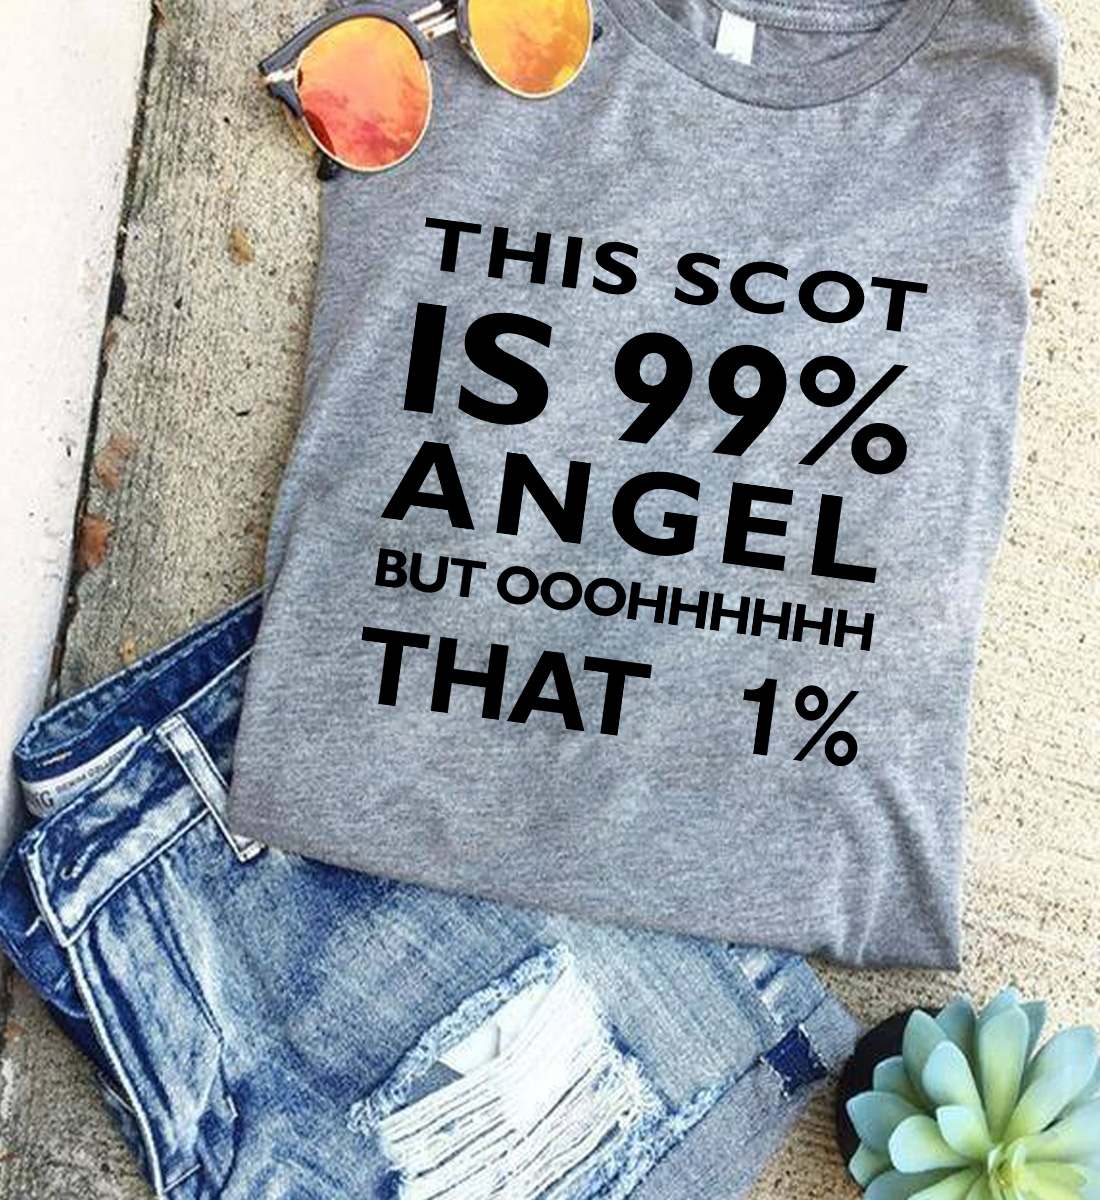 This Scot is 99% angel but ooohhhhh that 1% - Scot people